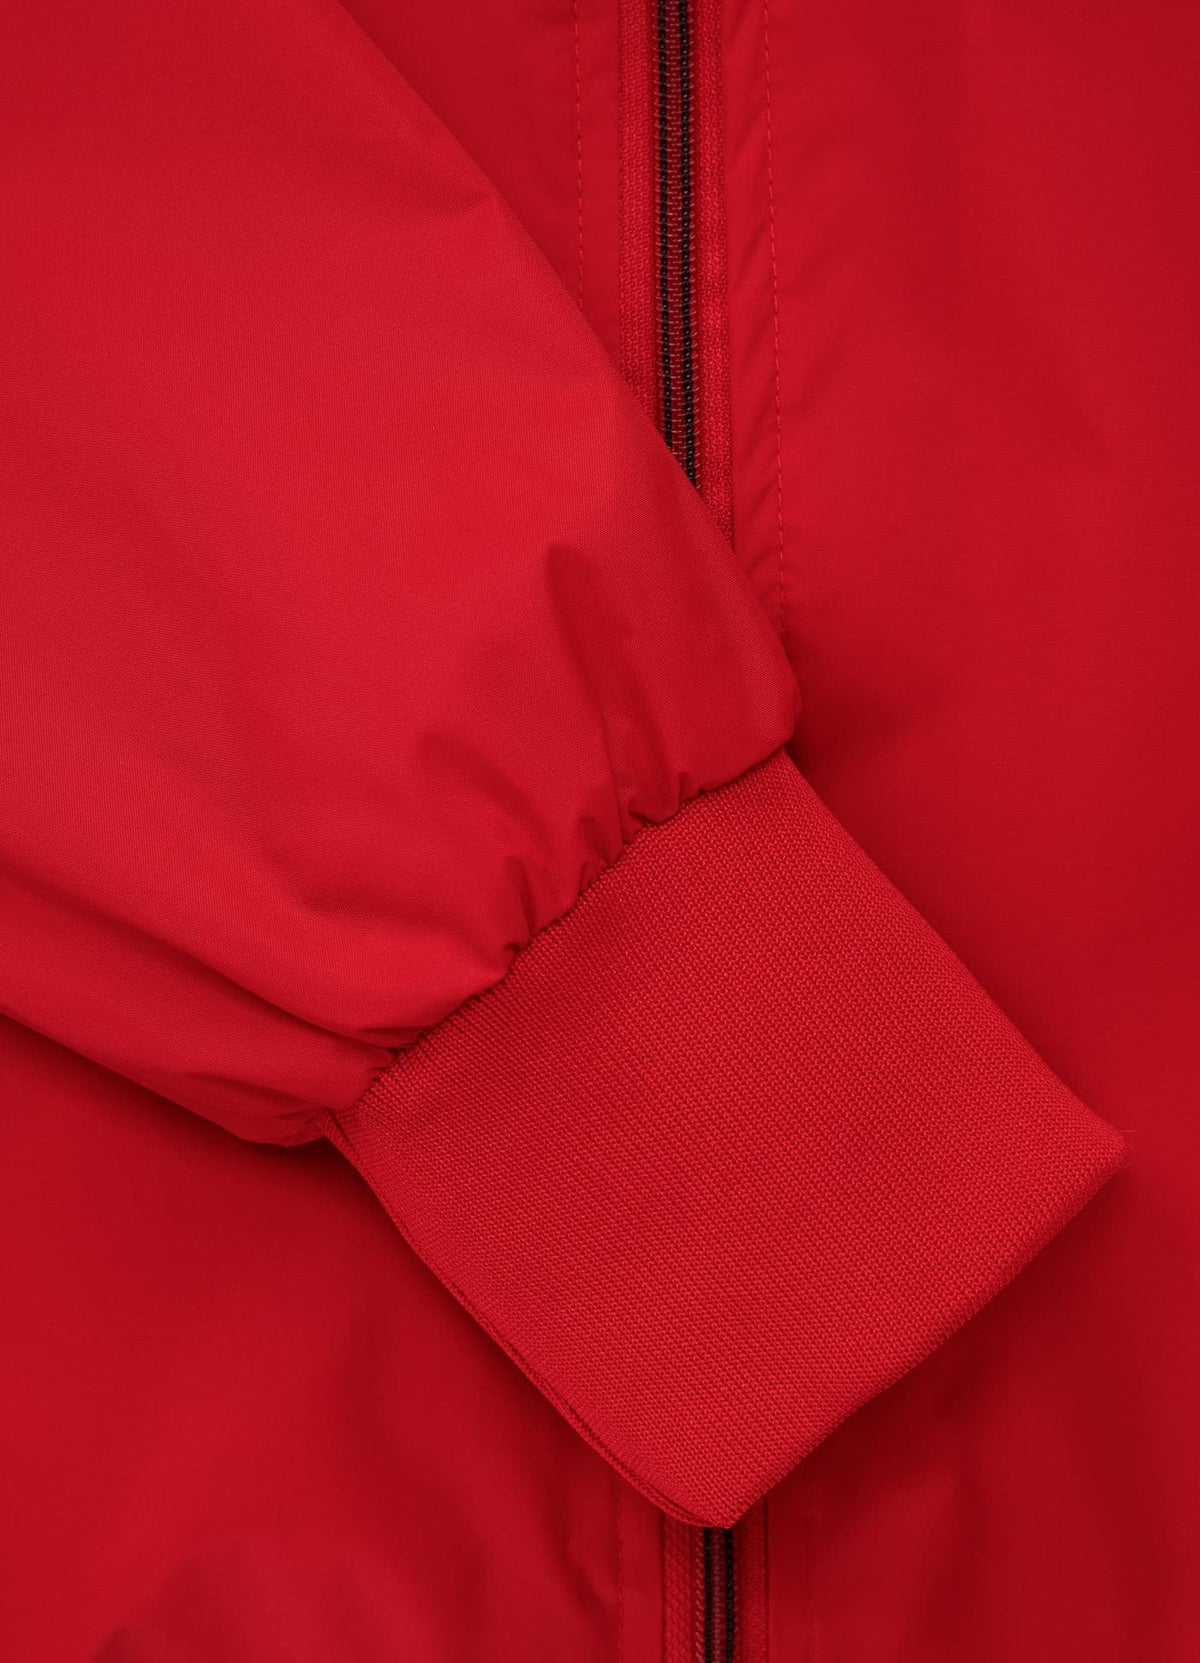 ATHLETIC Red Jacket.